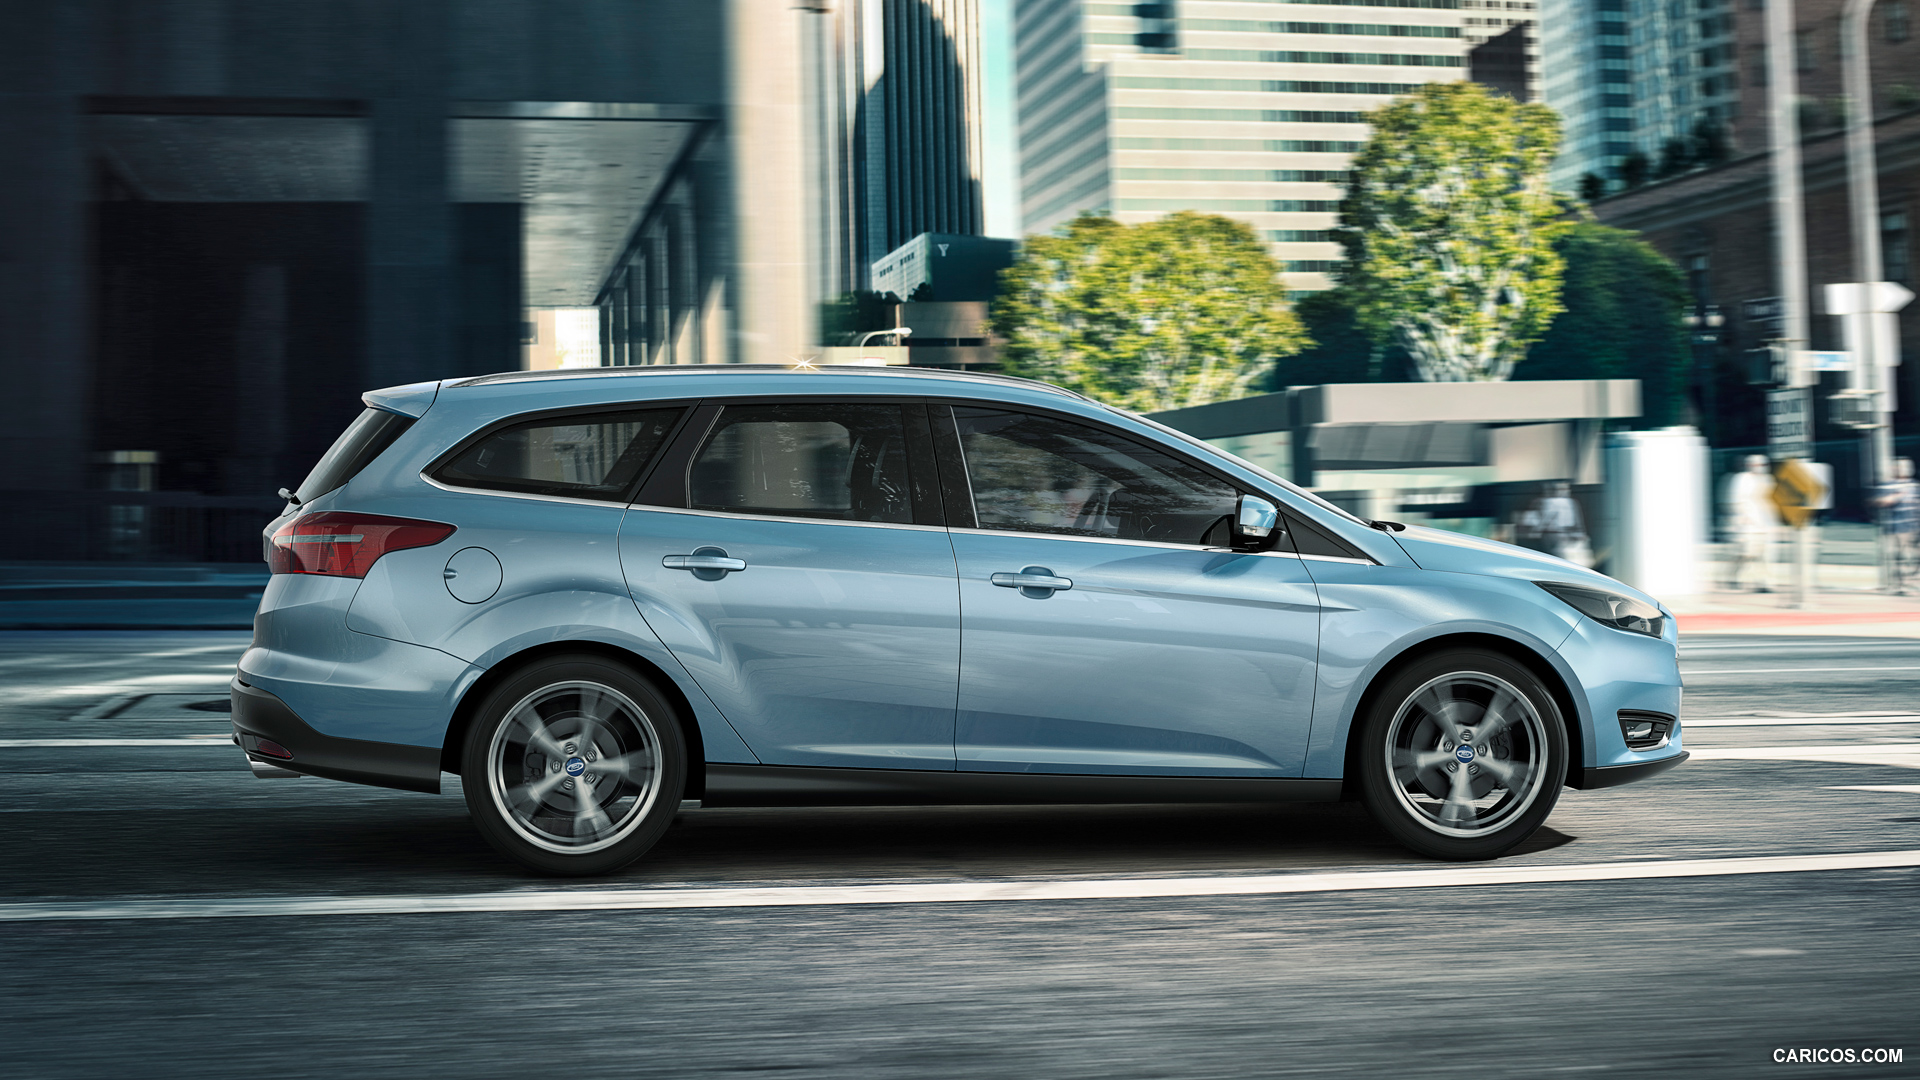 2015 Ford Focus Wagon Backgrounds, Compatible - PC, Mobile, Gadgets| 1920x1080 px